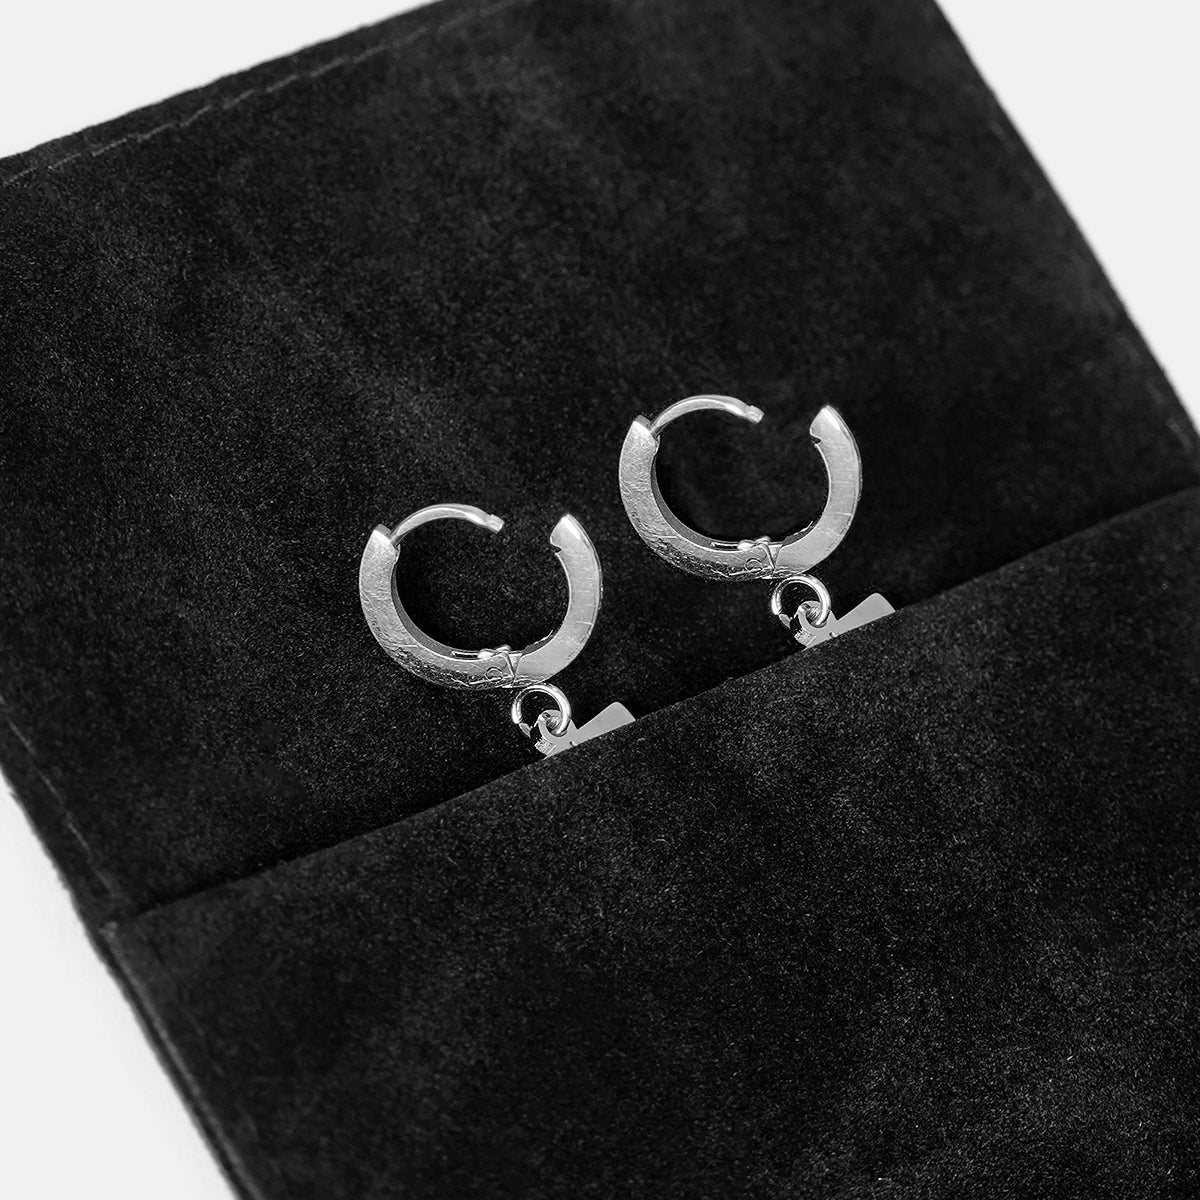 6 Number Earring - Stainless Steel